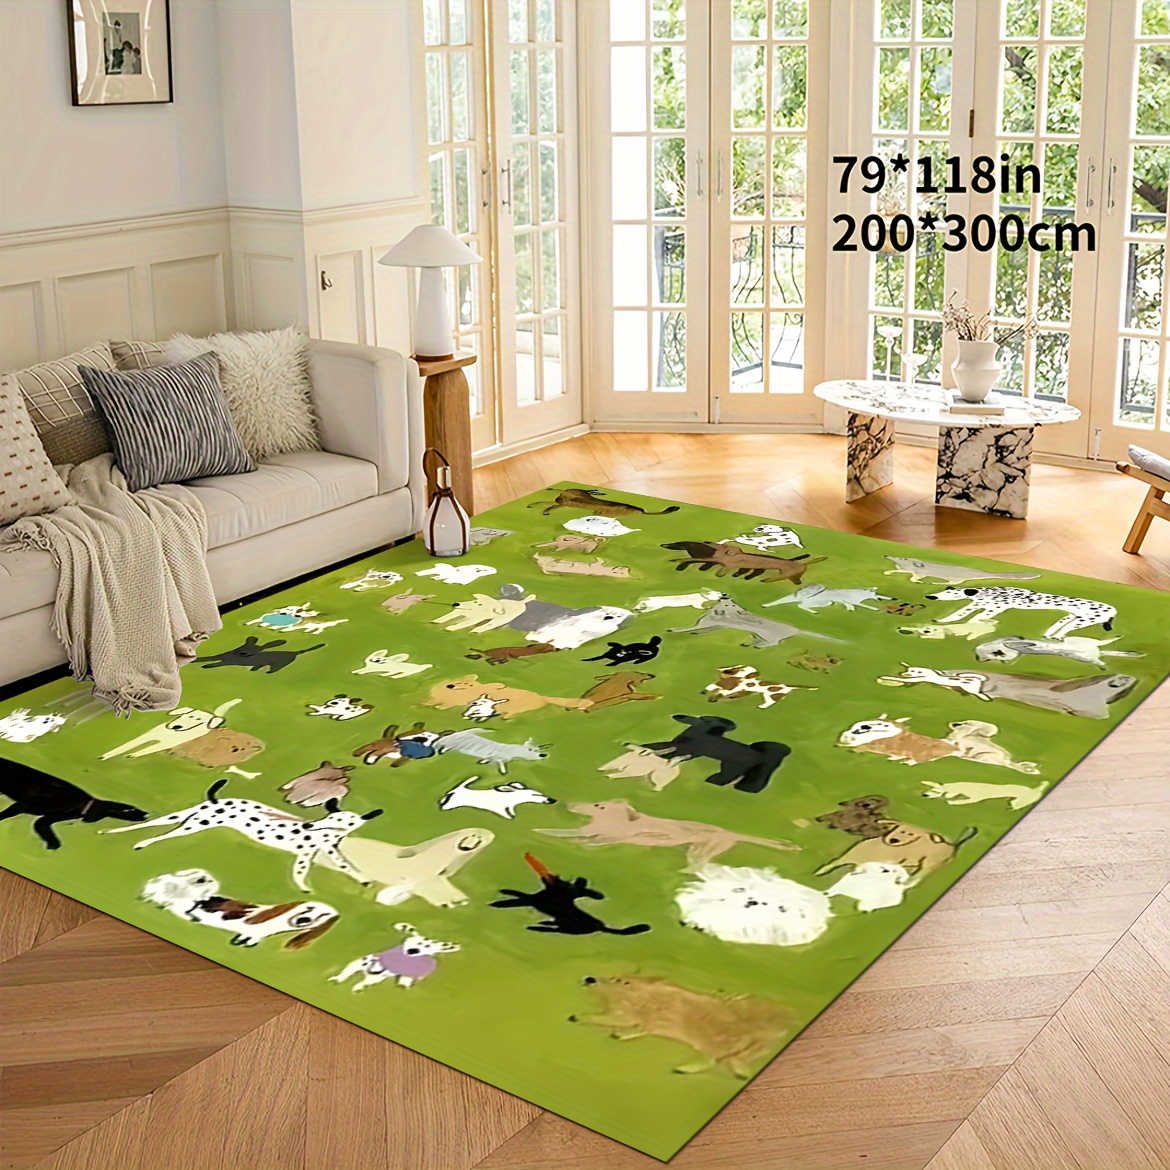 

1pc Grass Dog Pattern Living Room Carpet, Non-slip Cushioning And Fatigue Resistance, Machine Washable, Suitable For Living Room Bathroom Kitchen Bedroom, Entrance Carpet, Floor Decoration